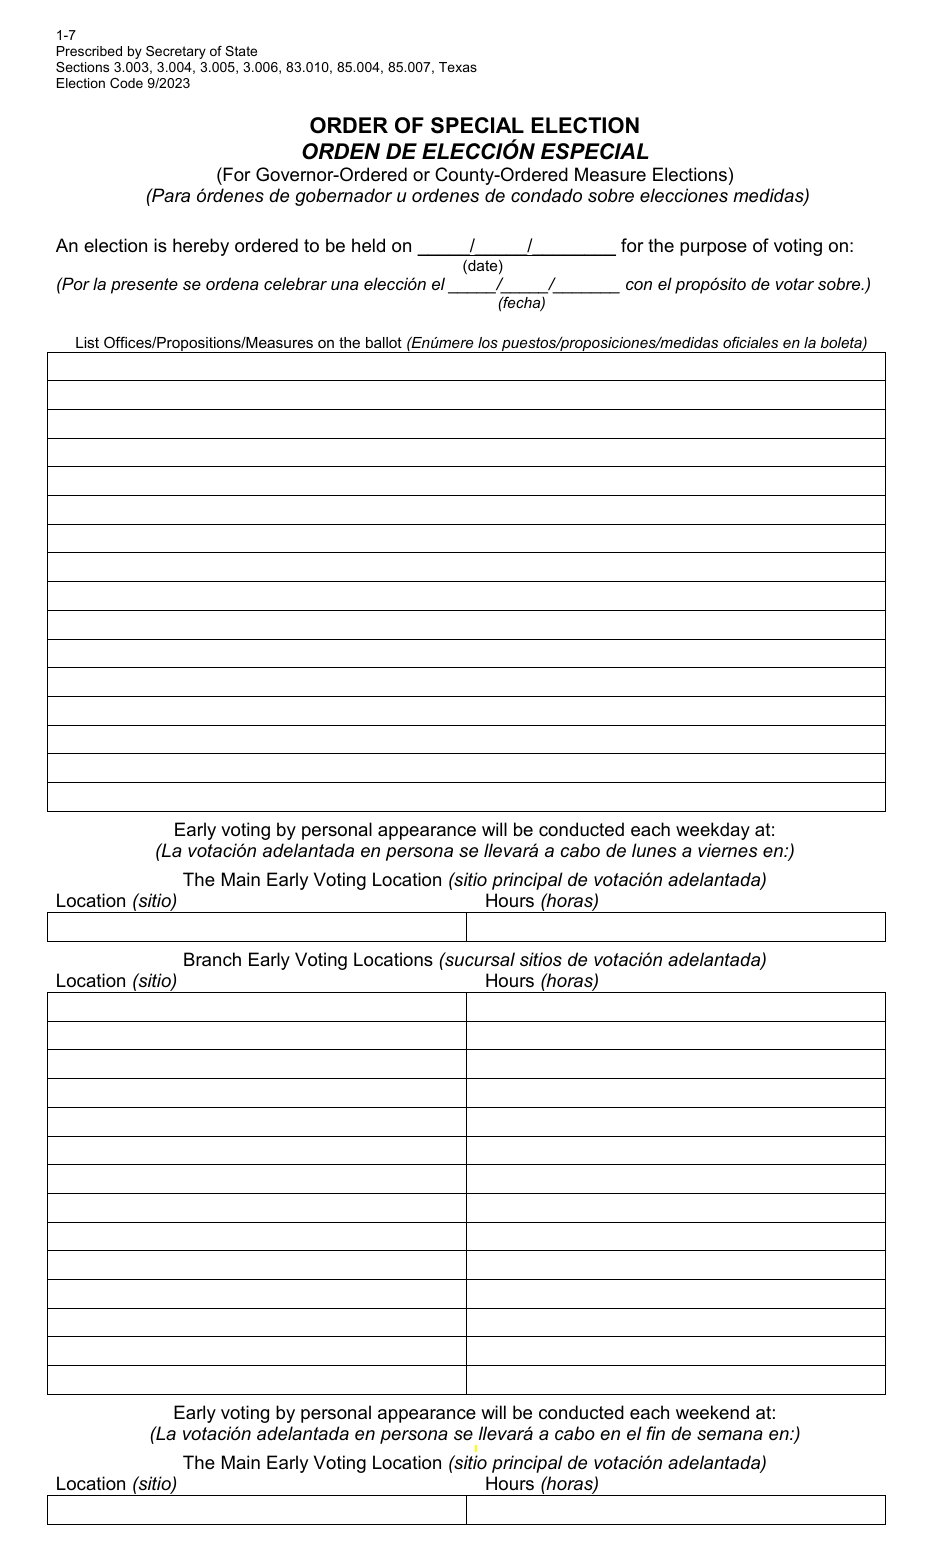 Form 1-7 Order of Special Election for Counties (For Governor-Ordered or County-Ordered Measure Election) - Texas (English / Spanish), Page 1